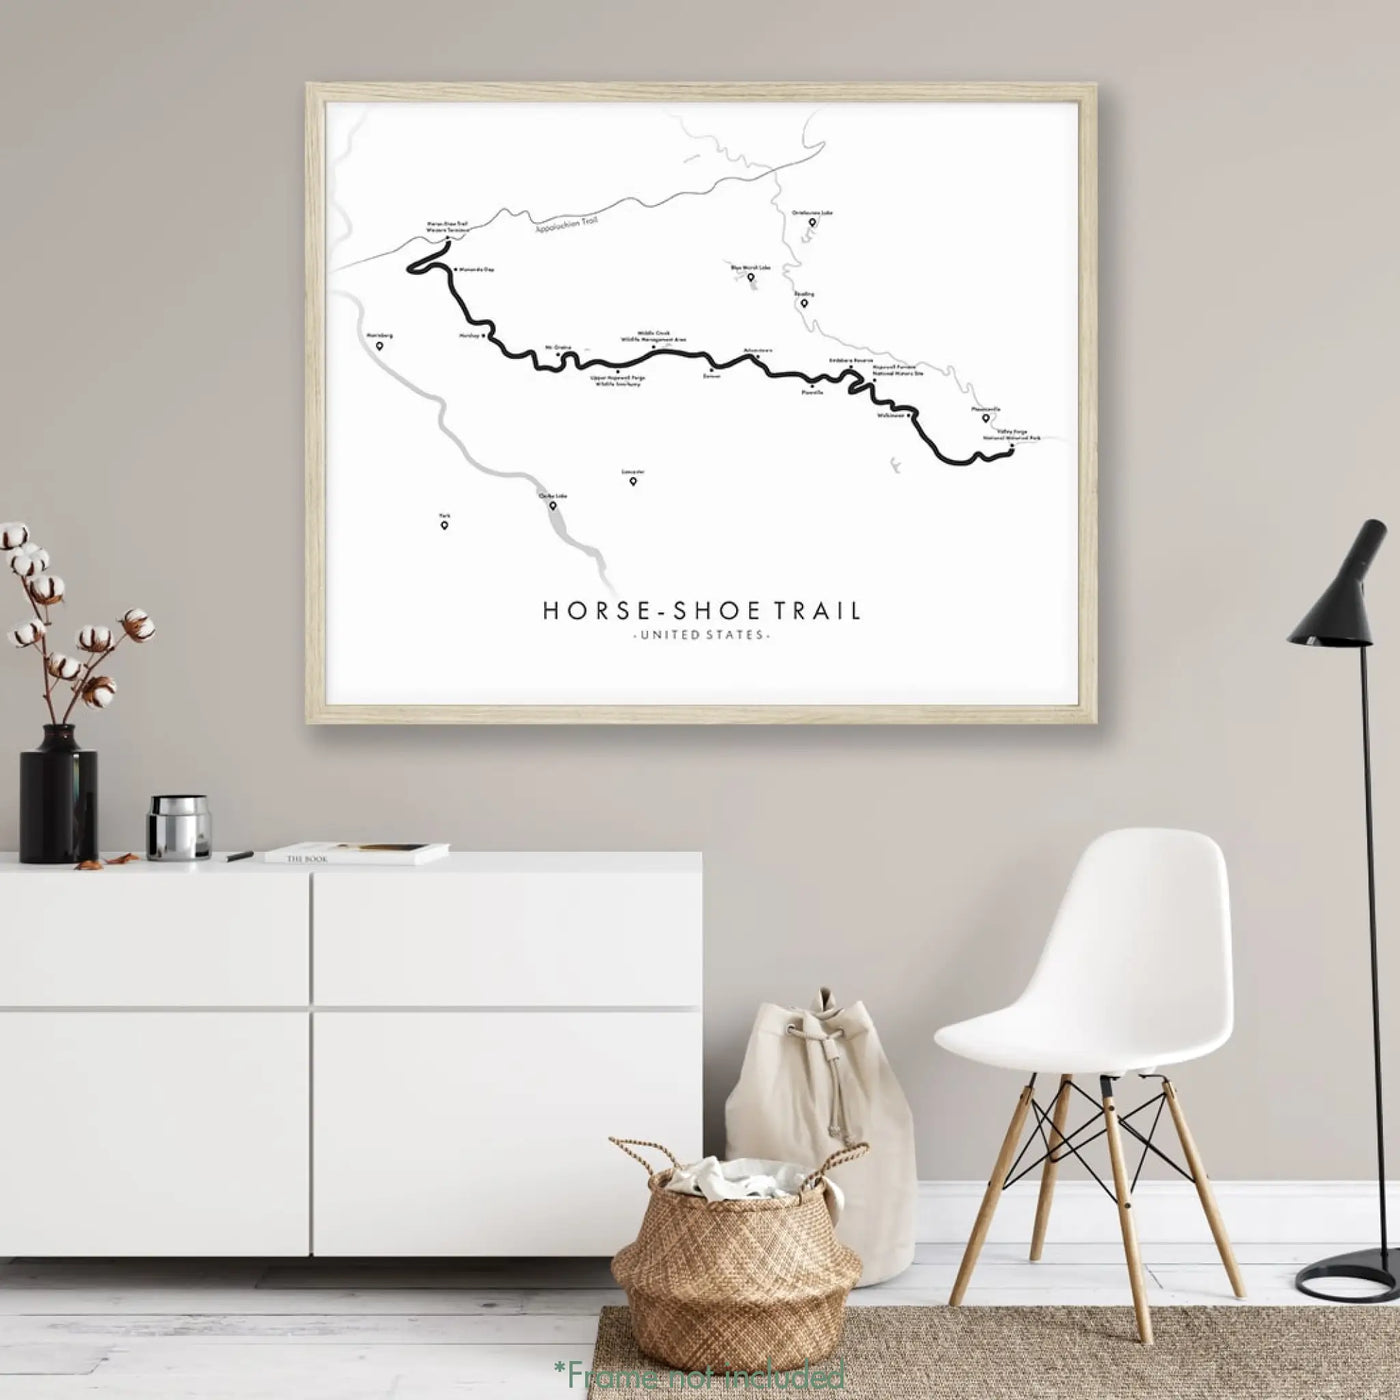 Trail Poster of Horse-Shoe Trail - White Mockup